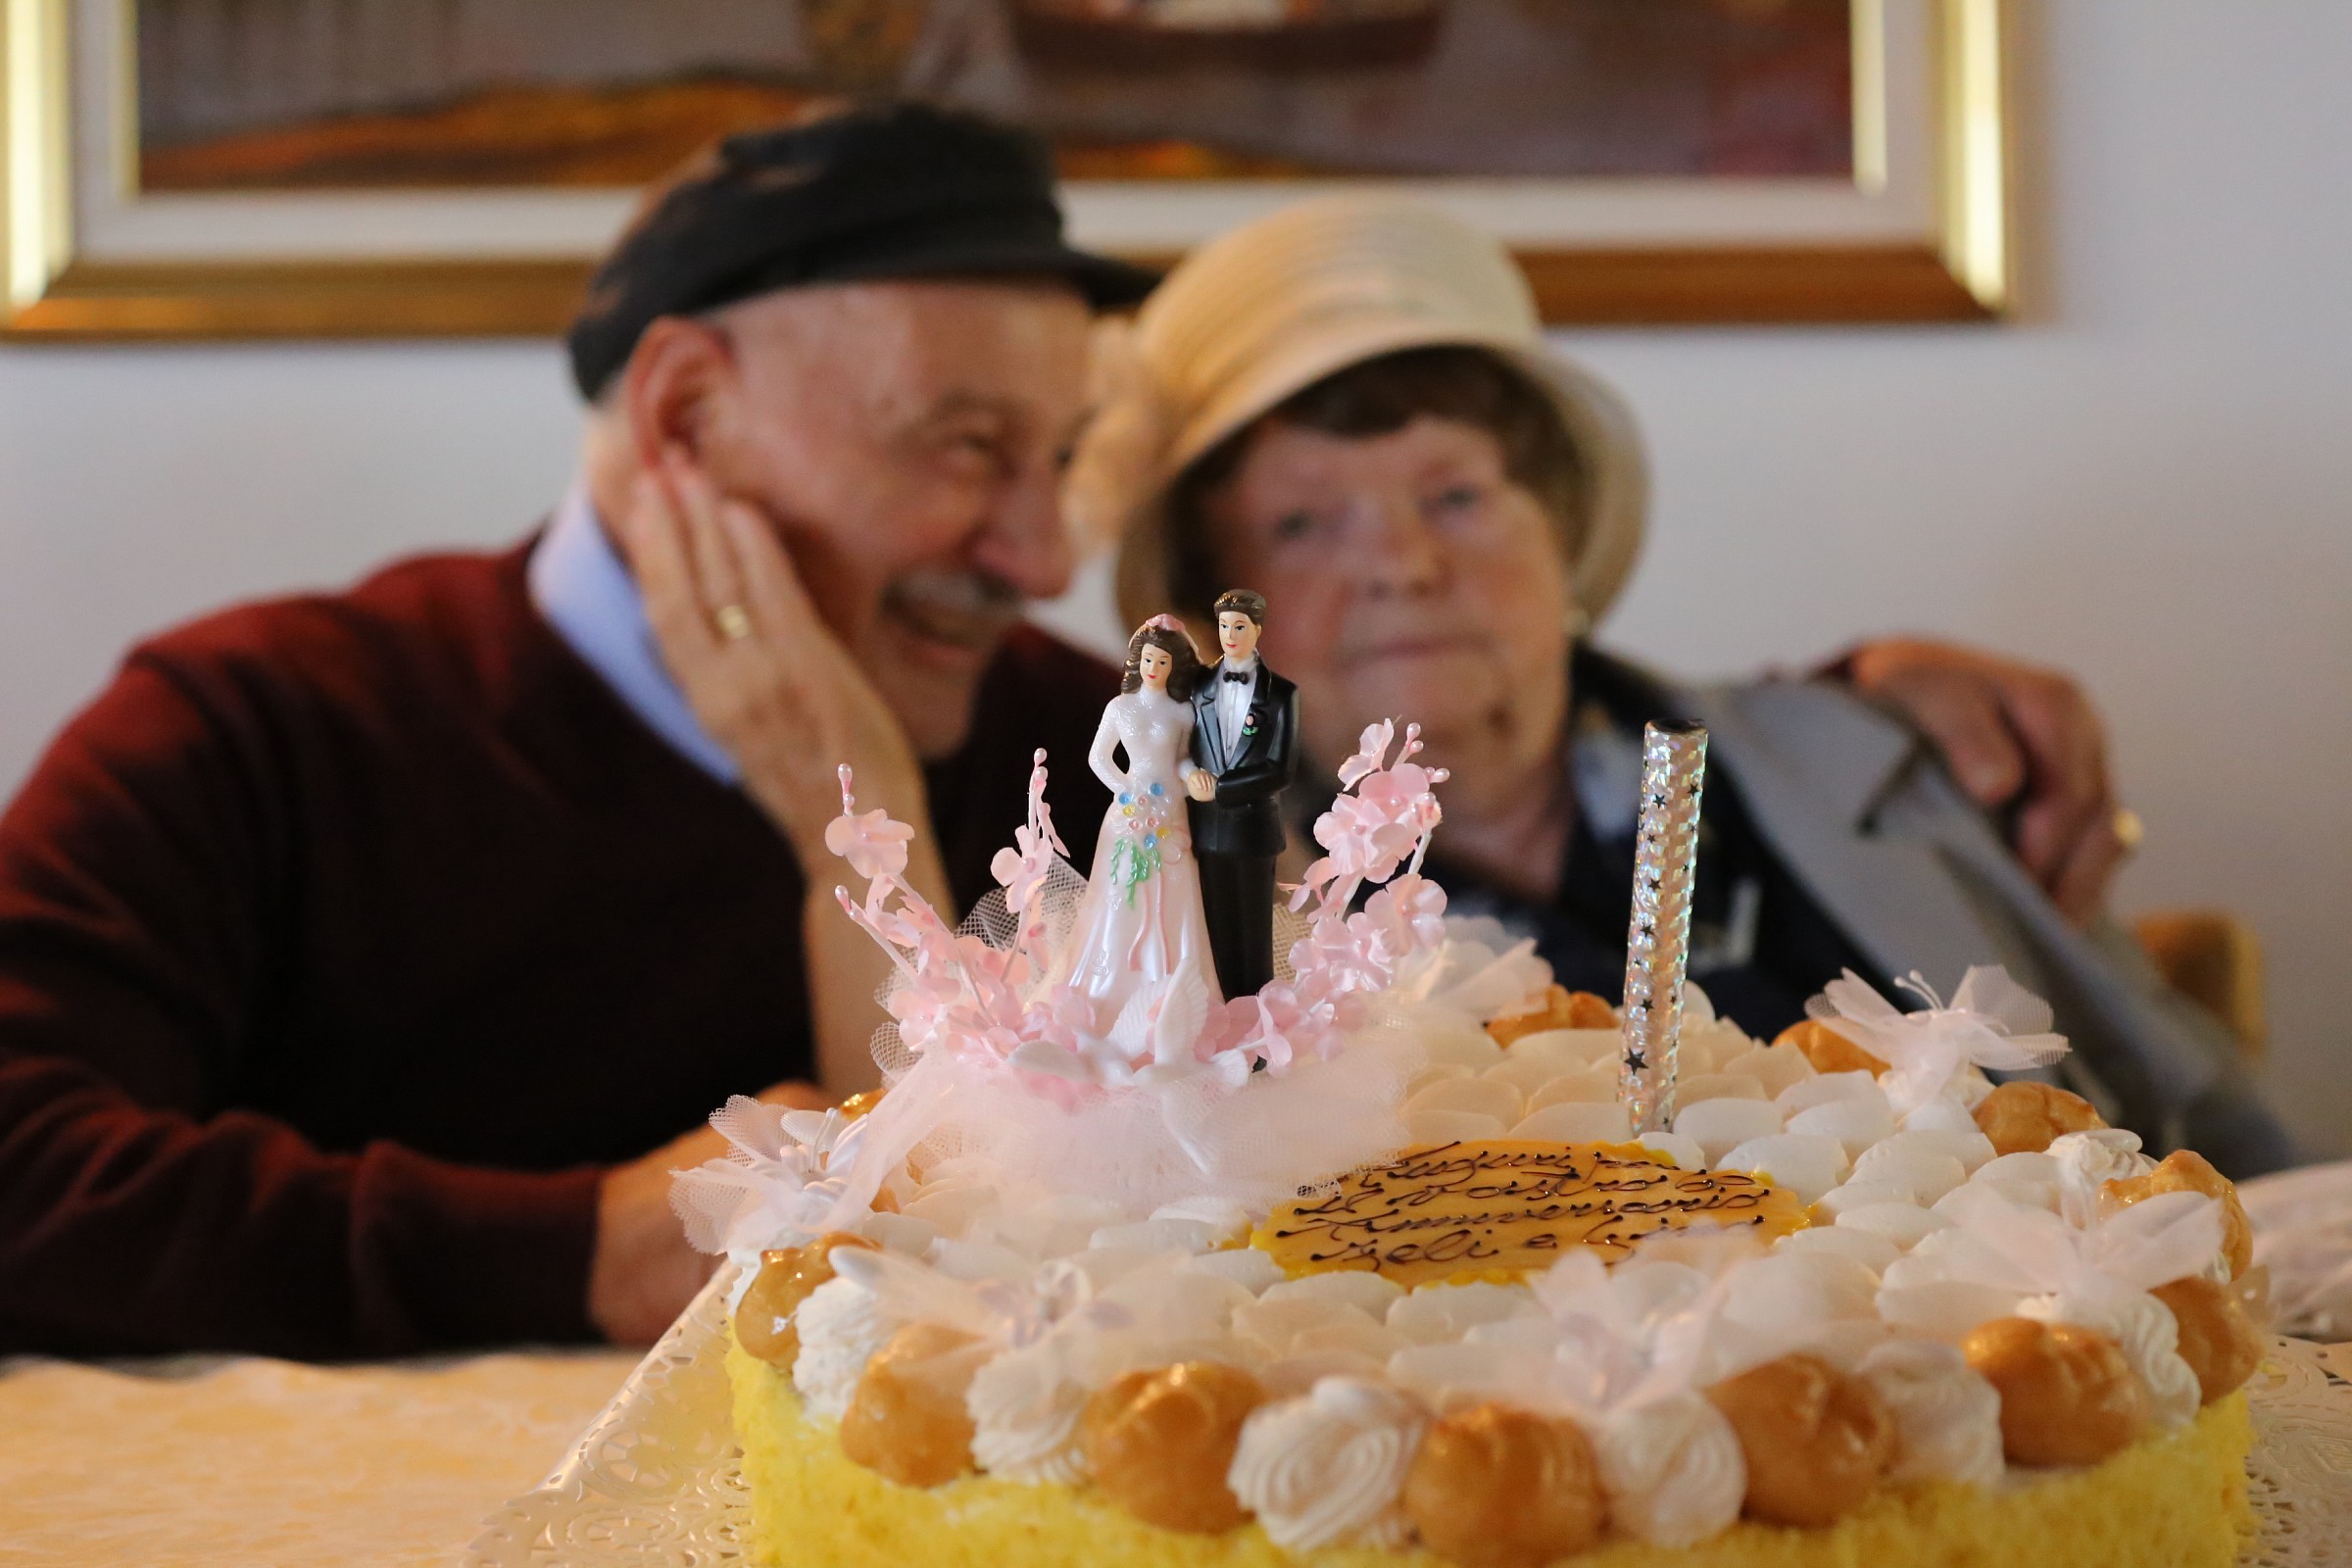 60 years of marriage...